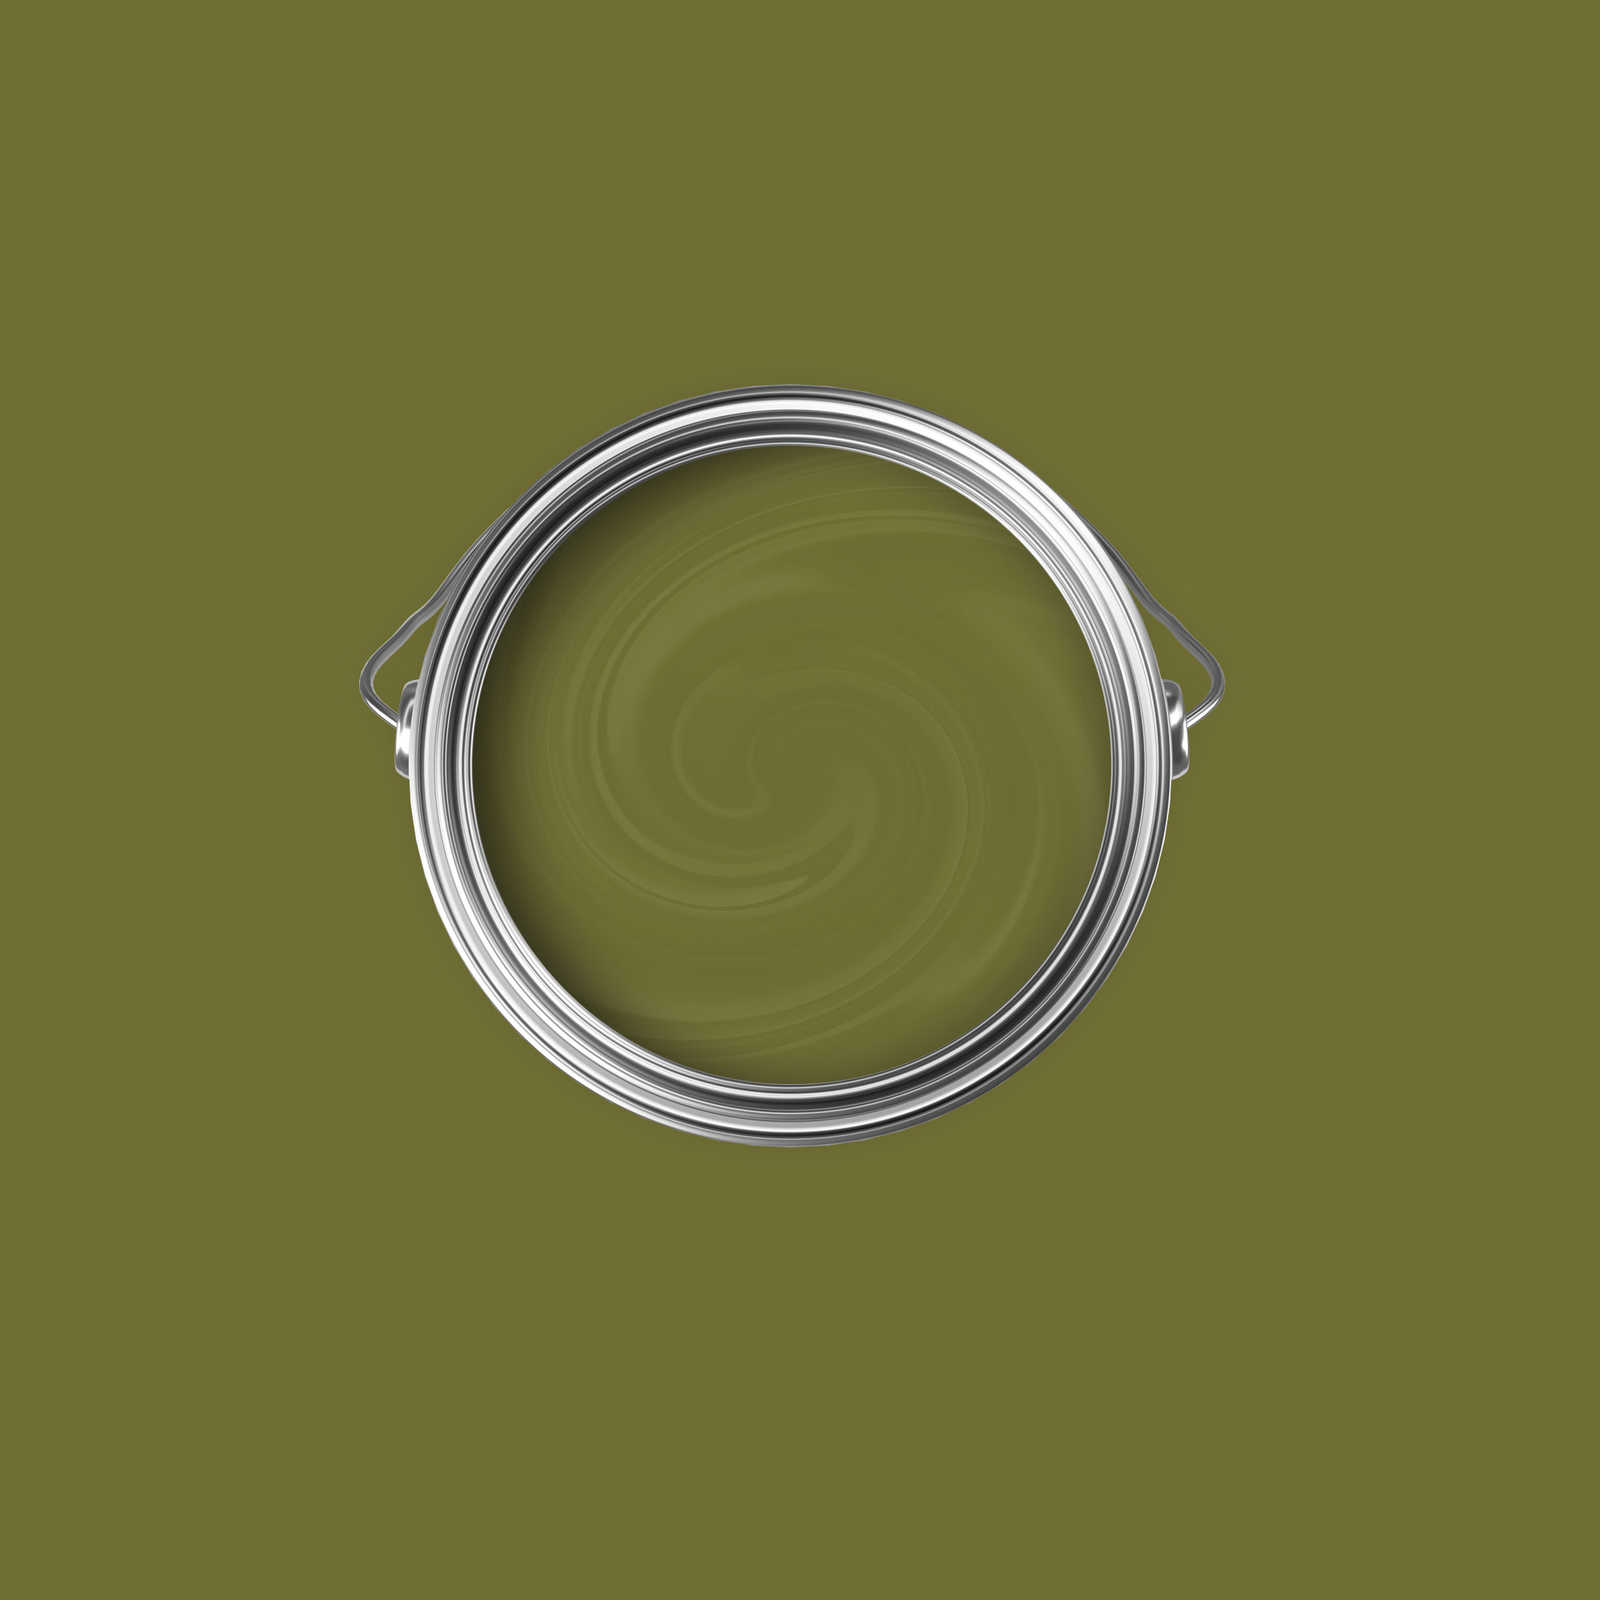             Premium Wall Paint Nature Forest Green »Lucky Lime« NW609 – 2.5 litre
        